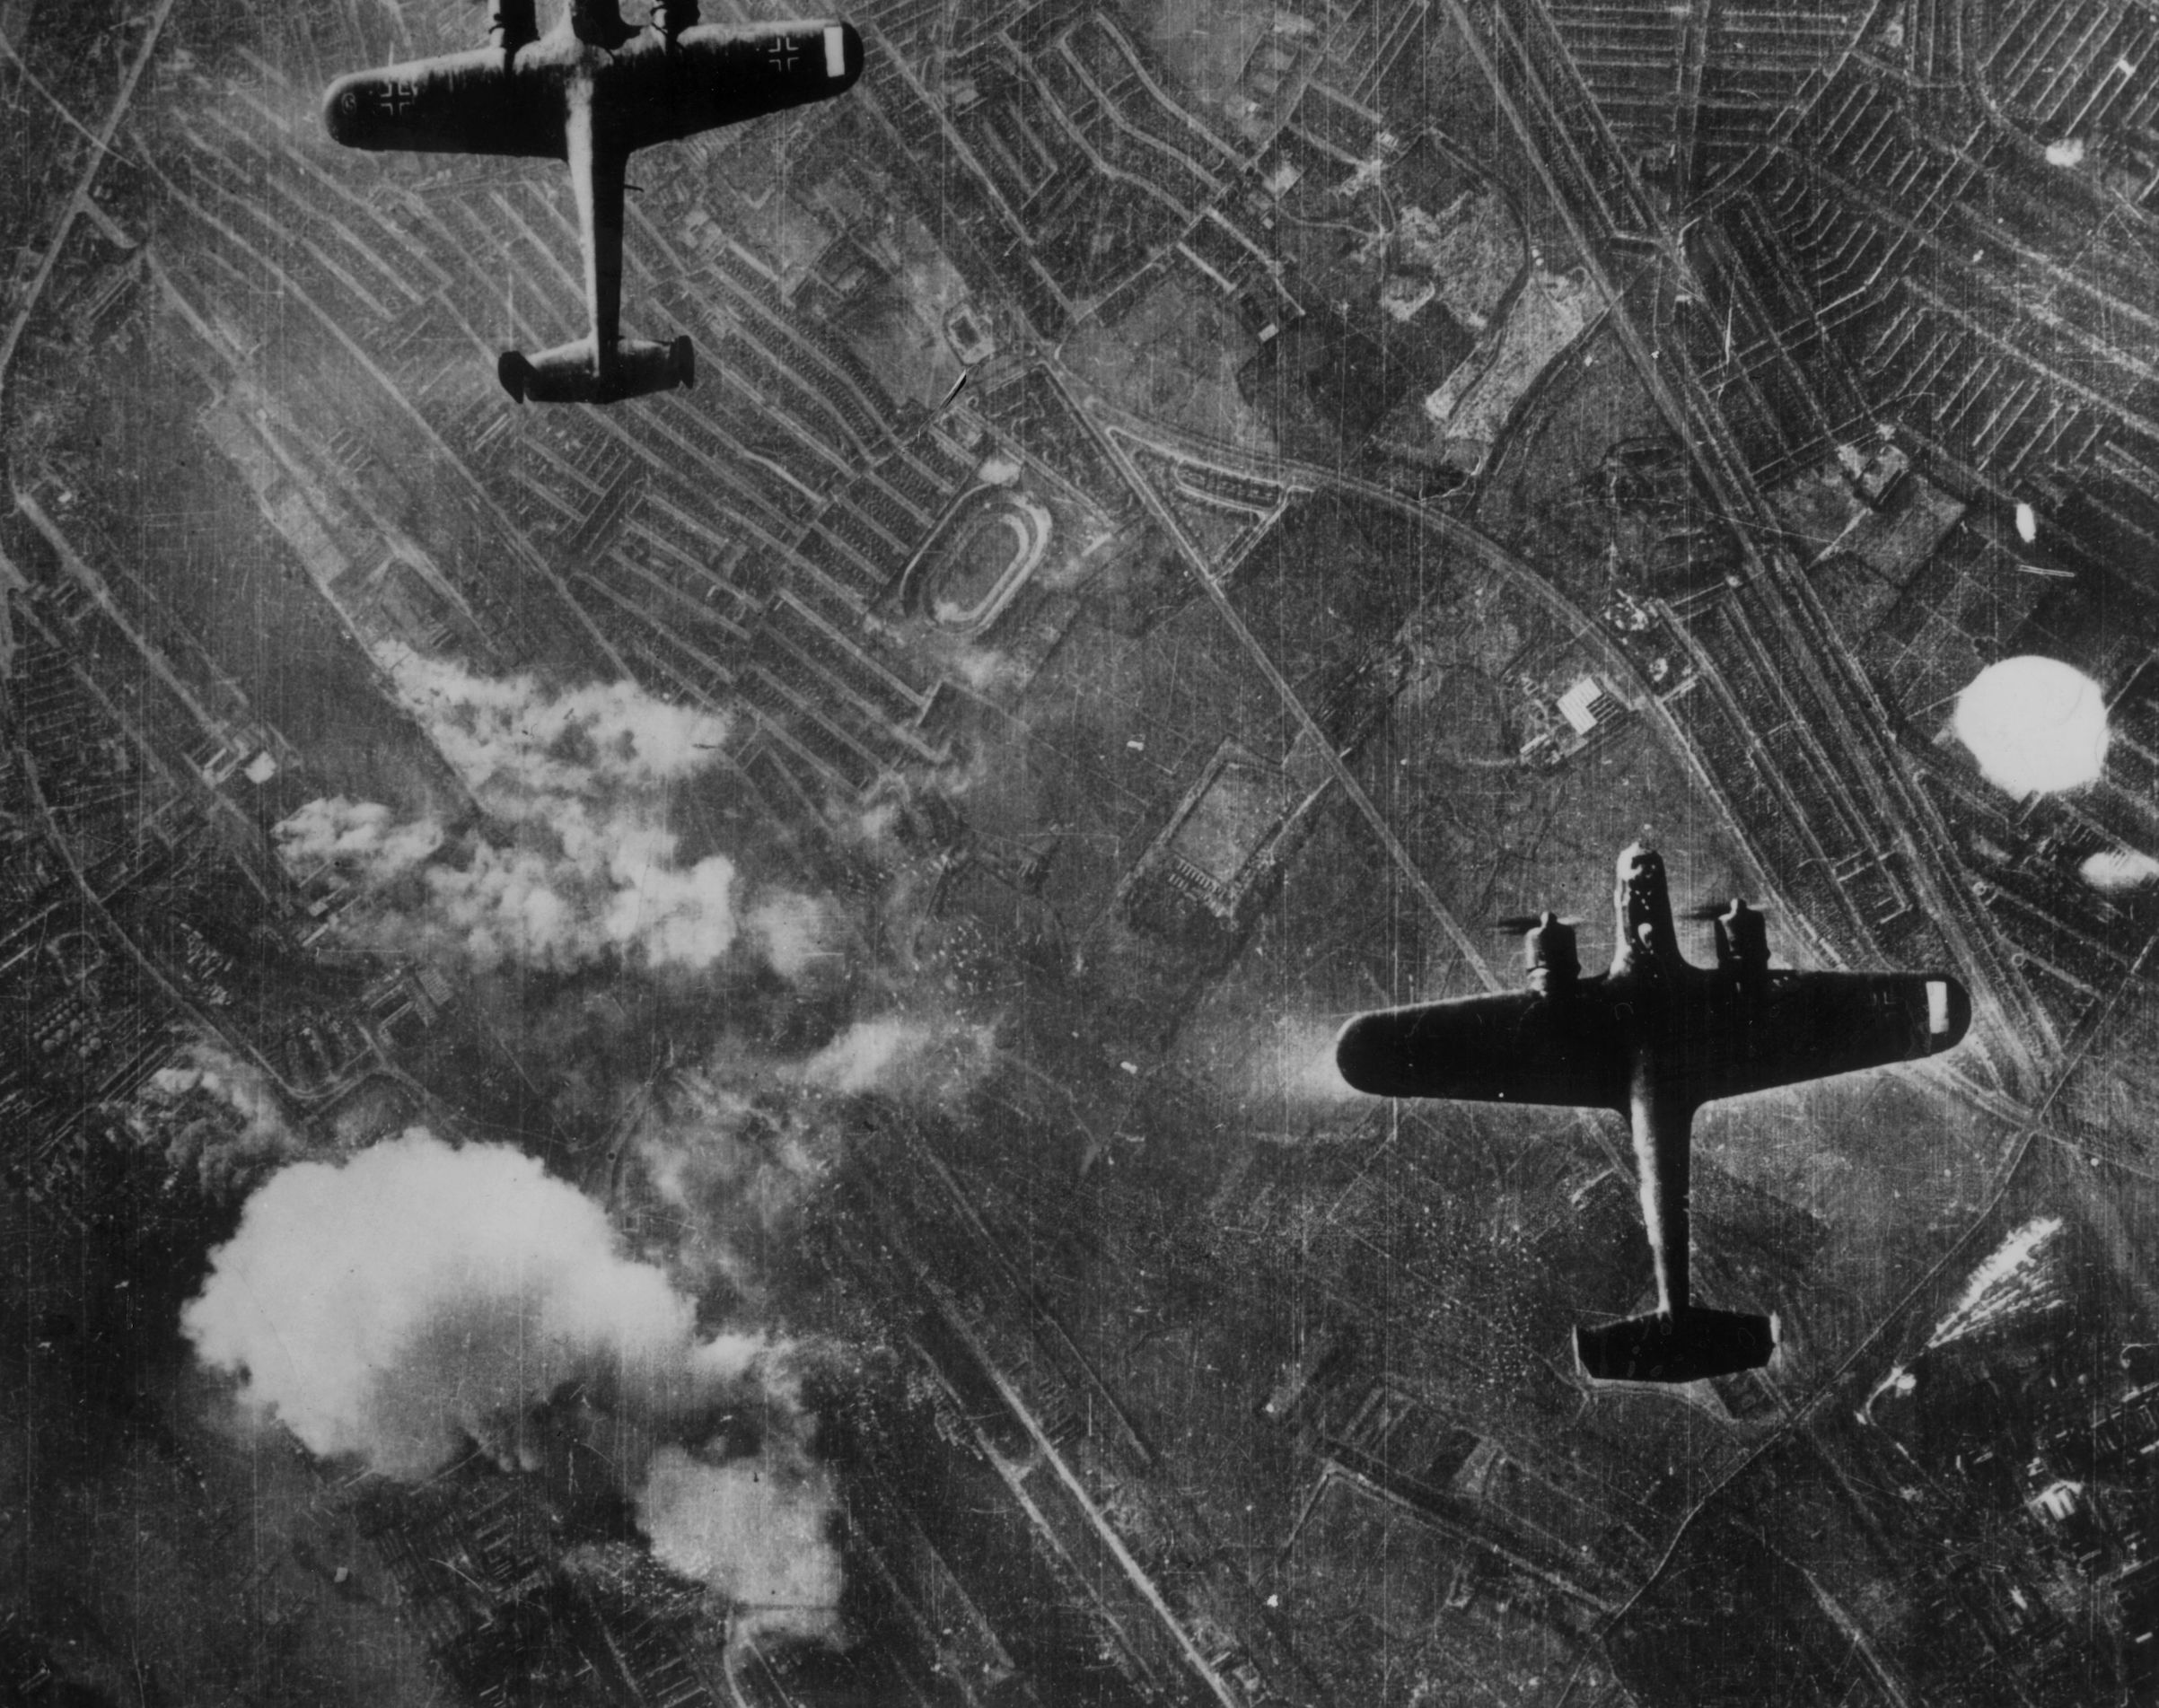 Two Luftwaffe Dornier 217 twin-engined medium bombers flying over the Silvertown area of London's Docklands on Sept. 7, 1940 at the beginning of the Blitz on London. (Getty Images)